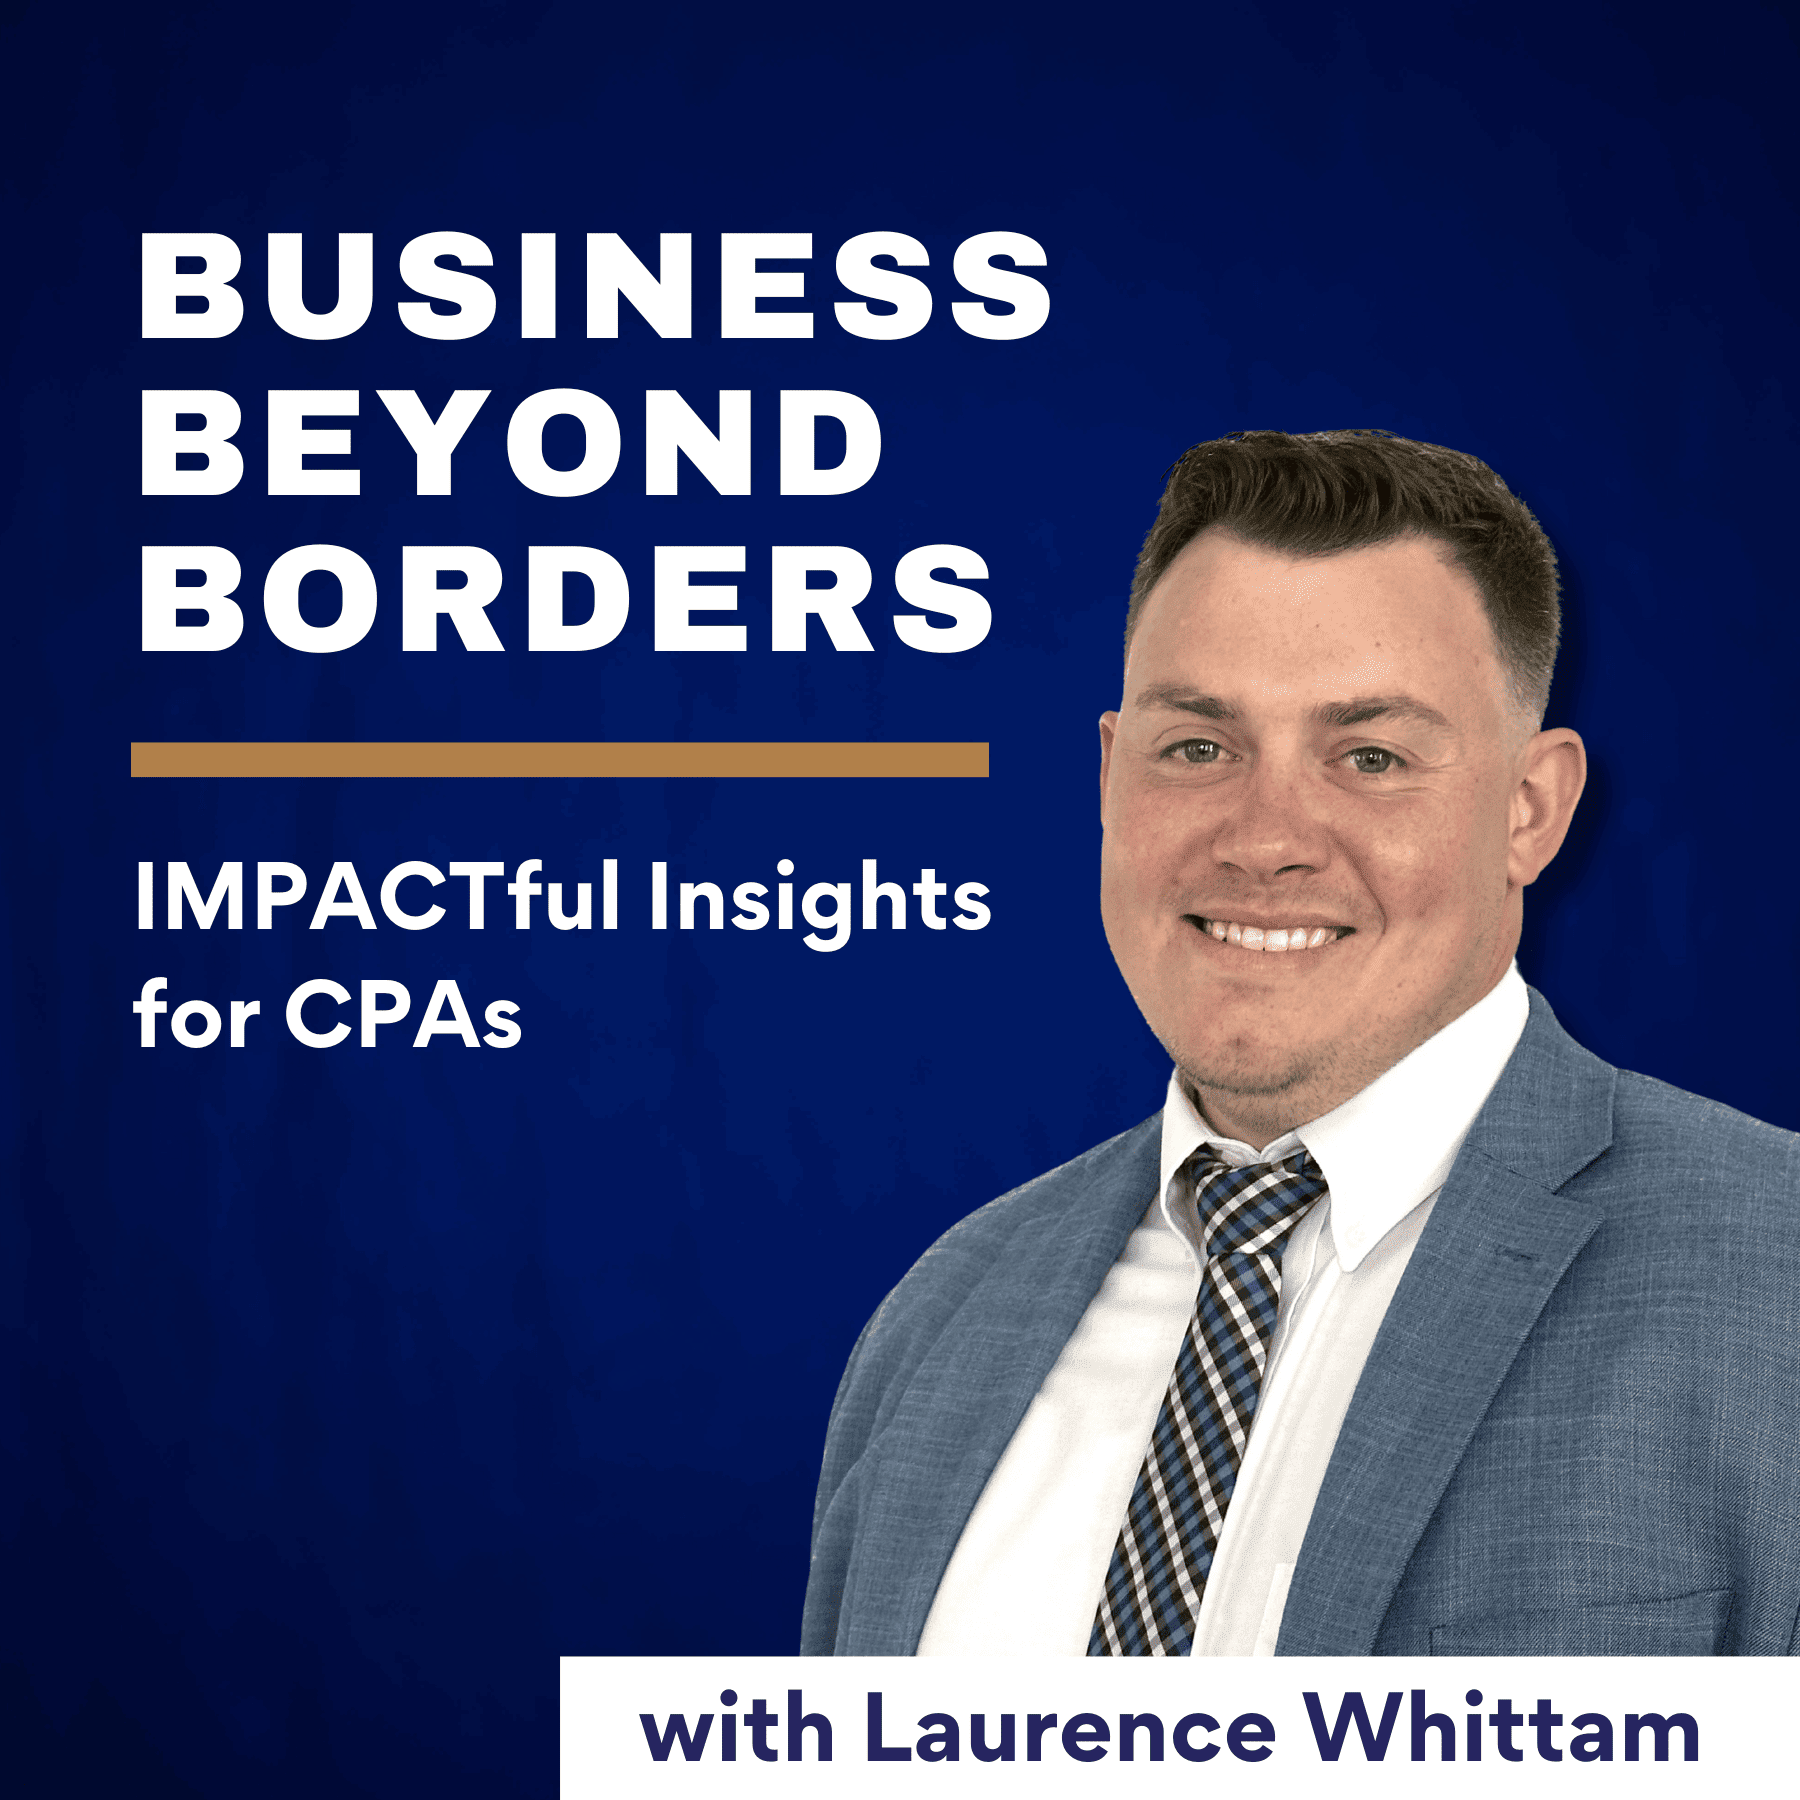 Business Beyond Borders: Impactful Insights for CPAs